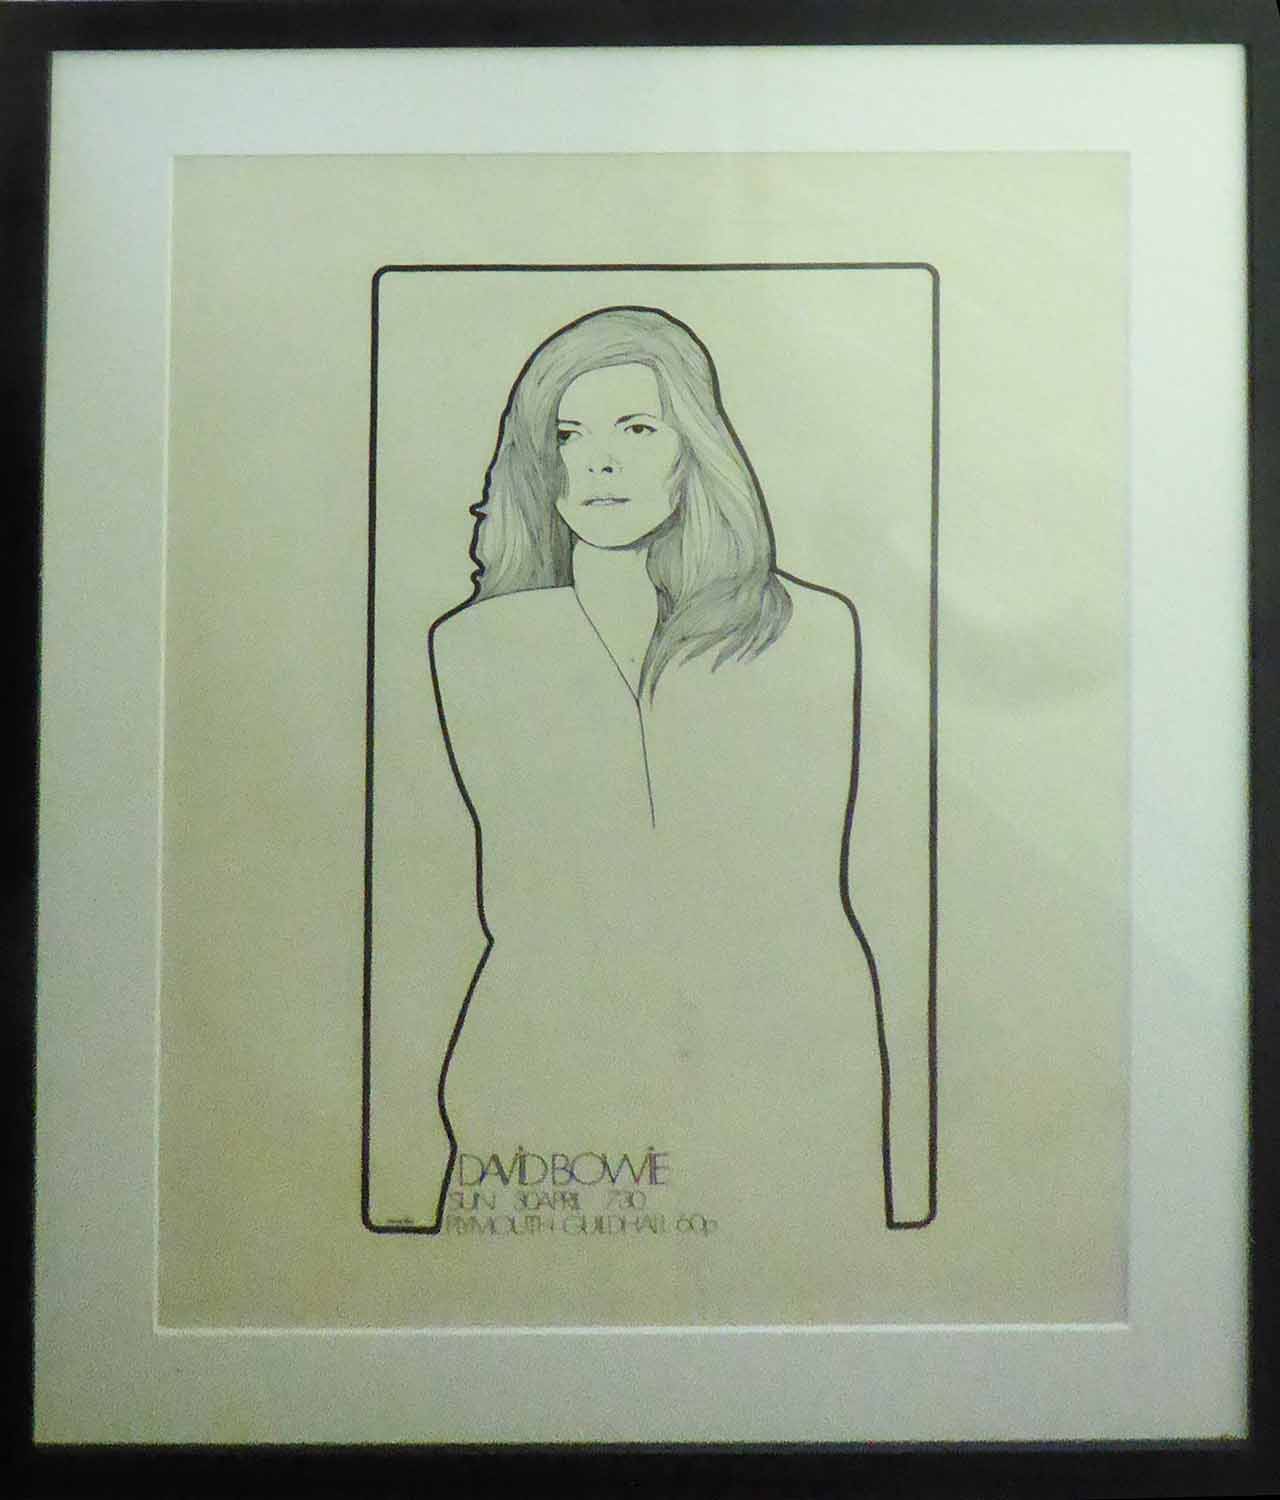 ORIGINAL 1970 POSTER, for David Bowie's concert at the Plymouth Guildhall, designed by Jim Corridon,